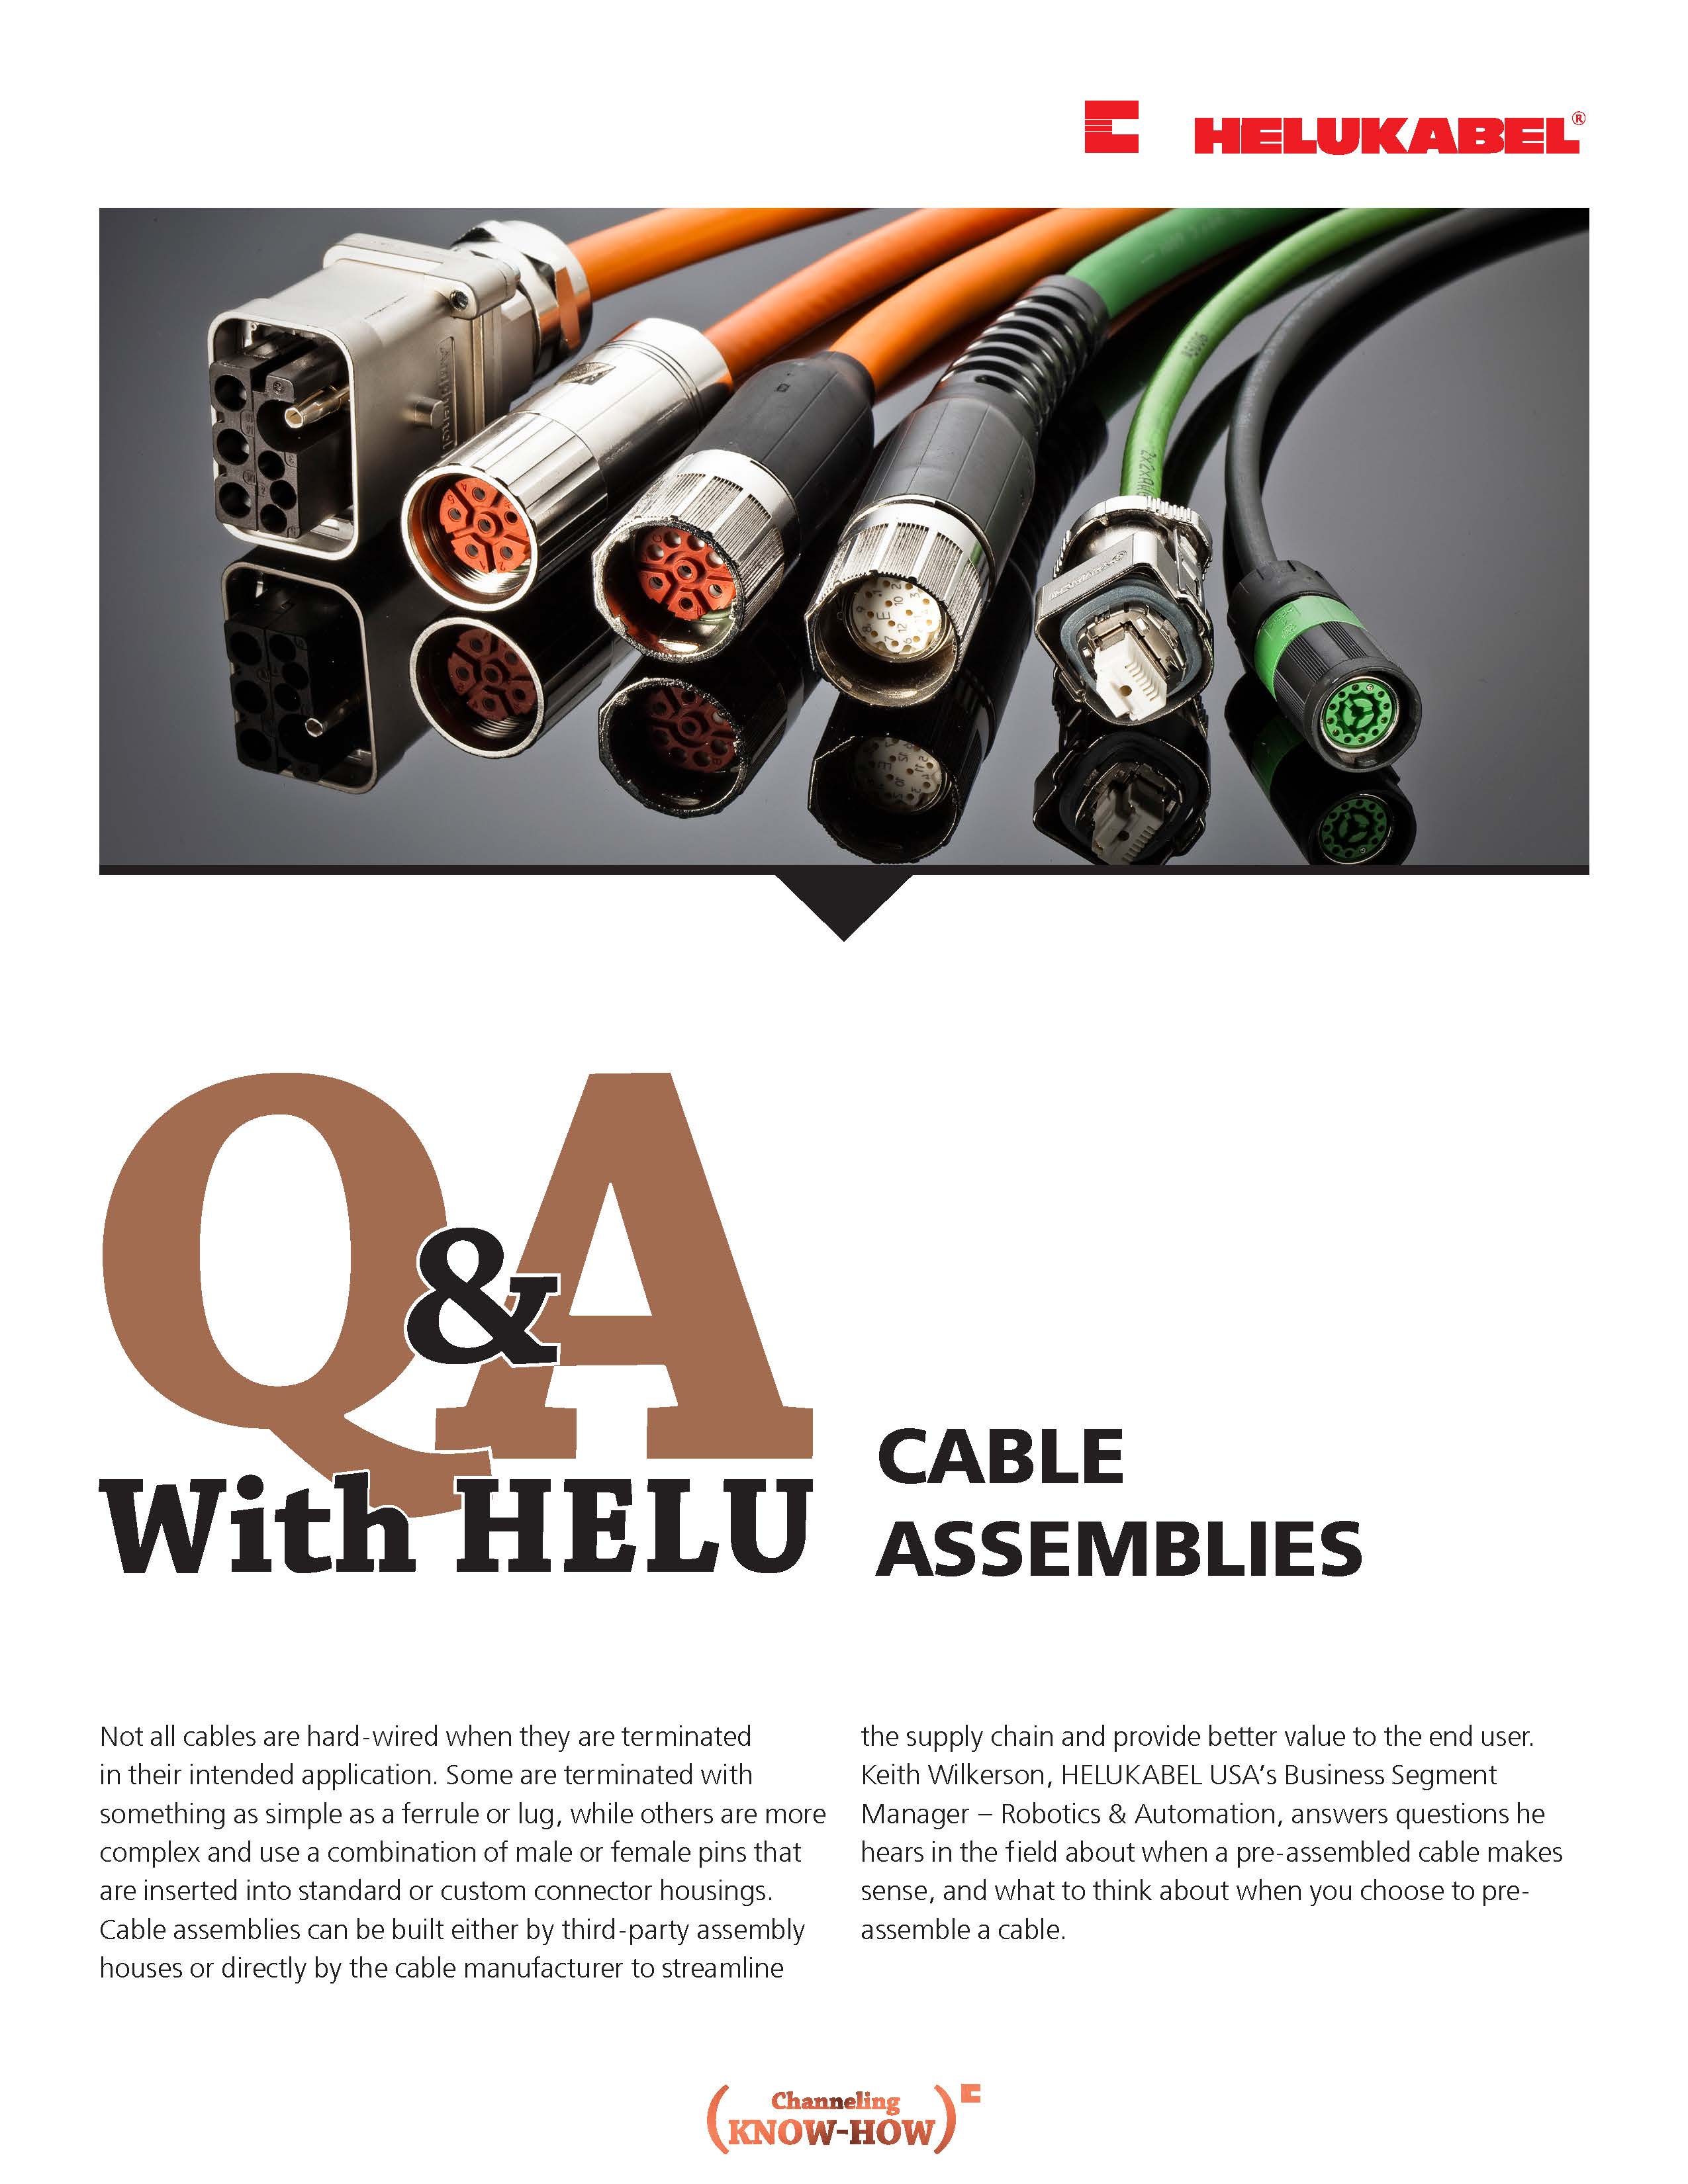 Q&A With HELU: Cable Assemblies